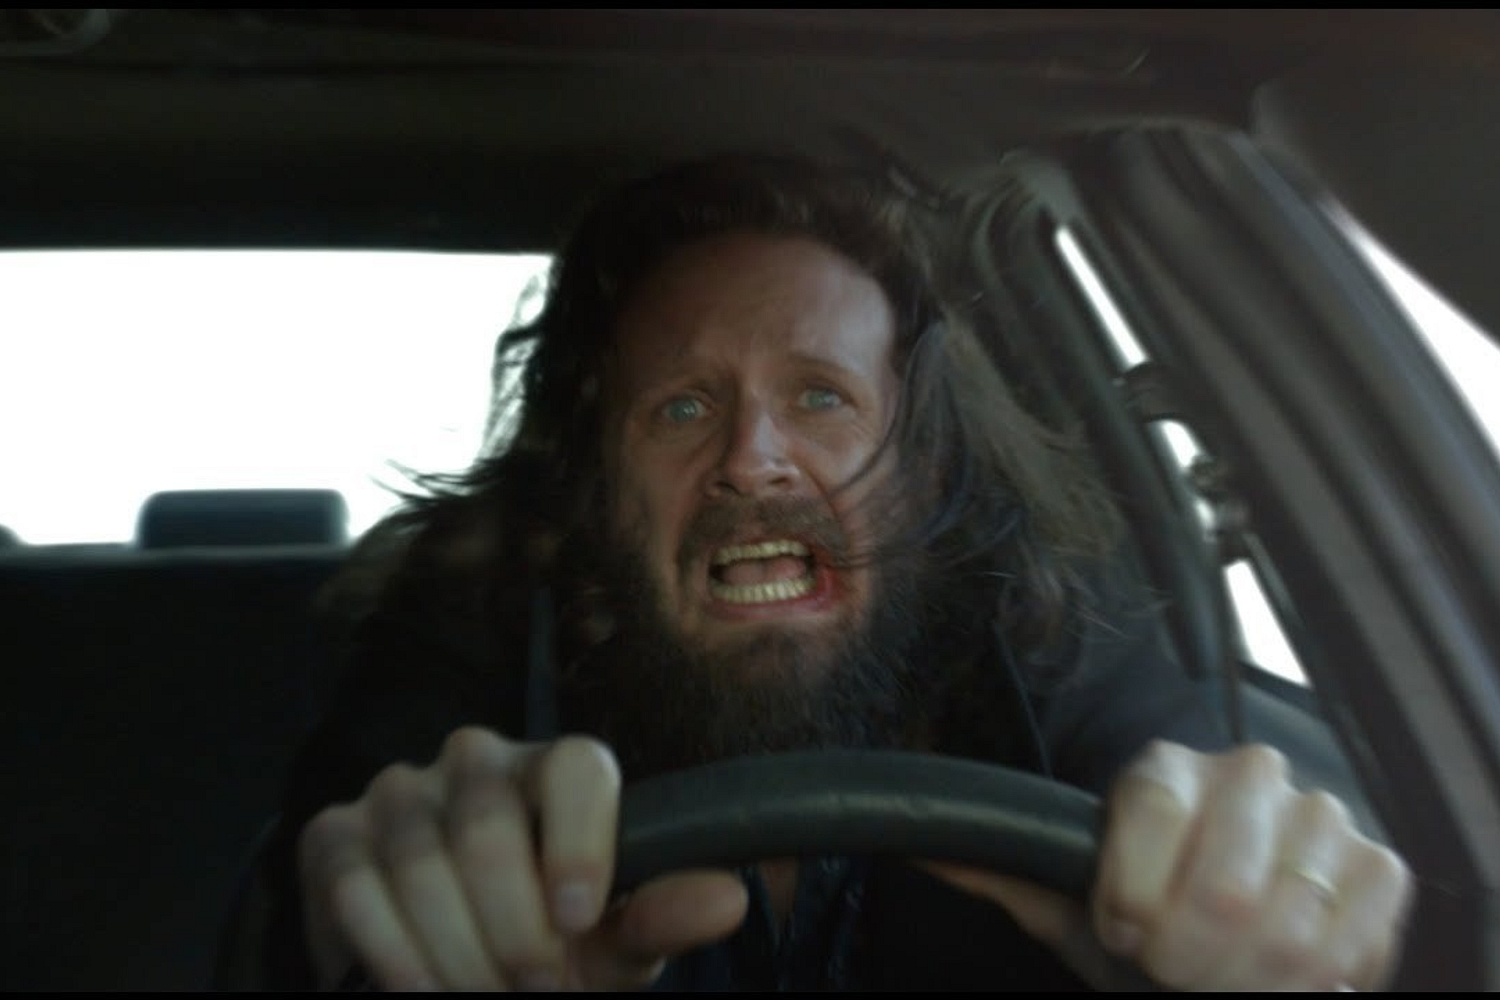 Father John Misty has a disastrous hotel stay in his surreal ‘Mr Tillman’ video